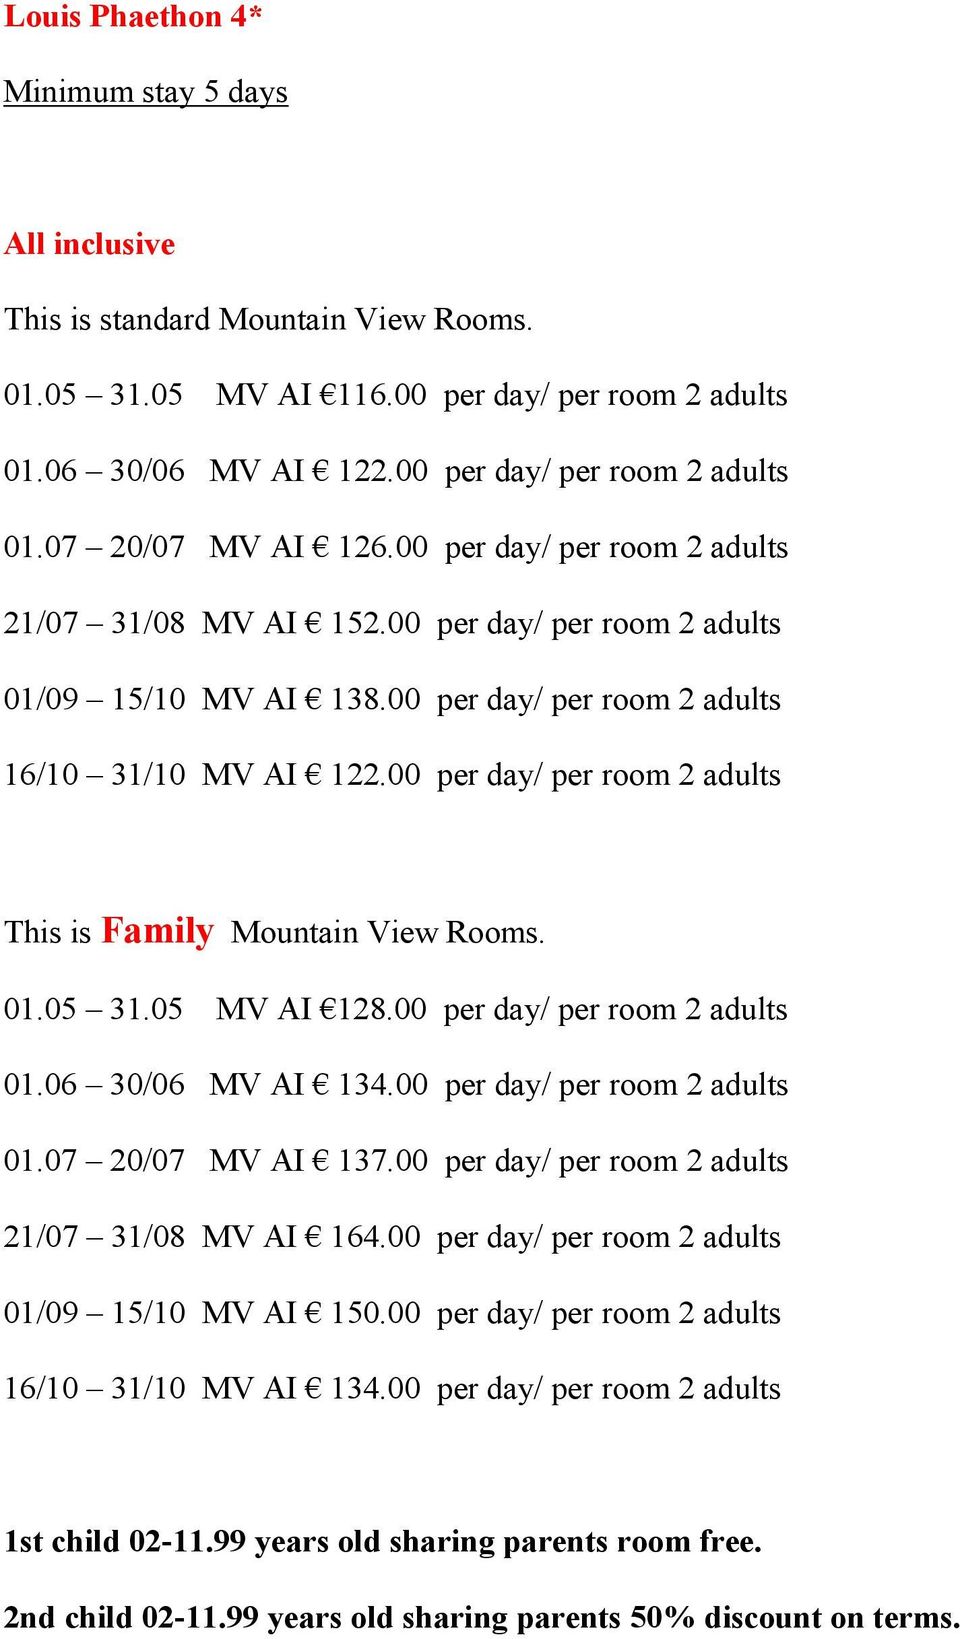 00 per day/ per room 2 adults This is Family Mountain View Rooms. 01.05 31.05 MV AI 128.00 per day/ per room 2 adults 01.06 30/06 MV AI 134.00 per day/ per room 2 adults 01.07 20/07 MV AI 137.